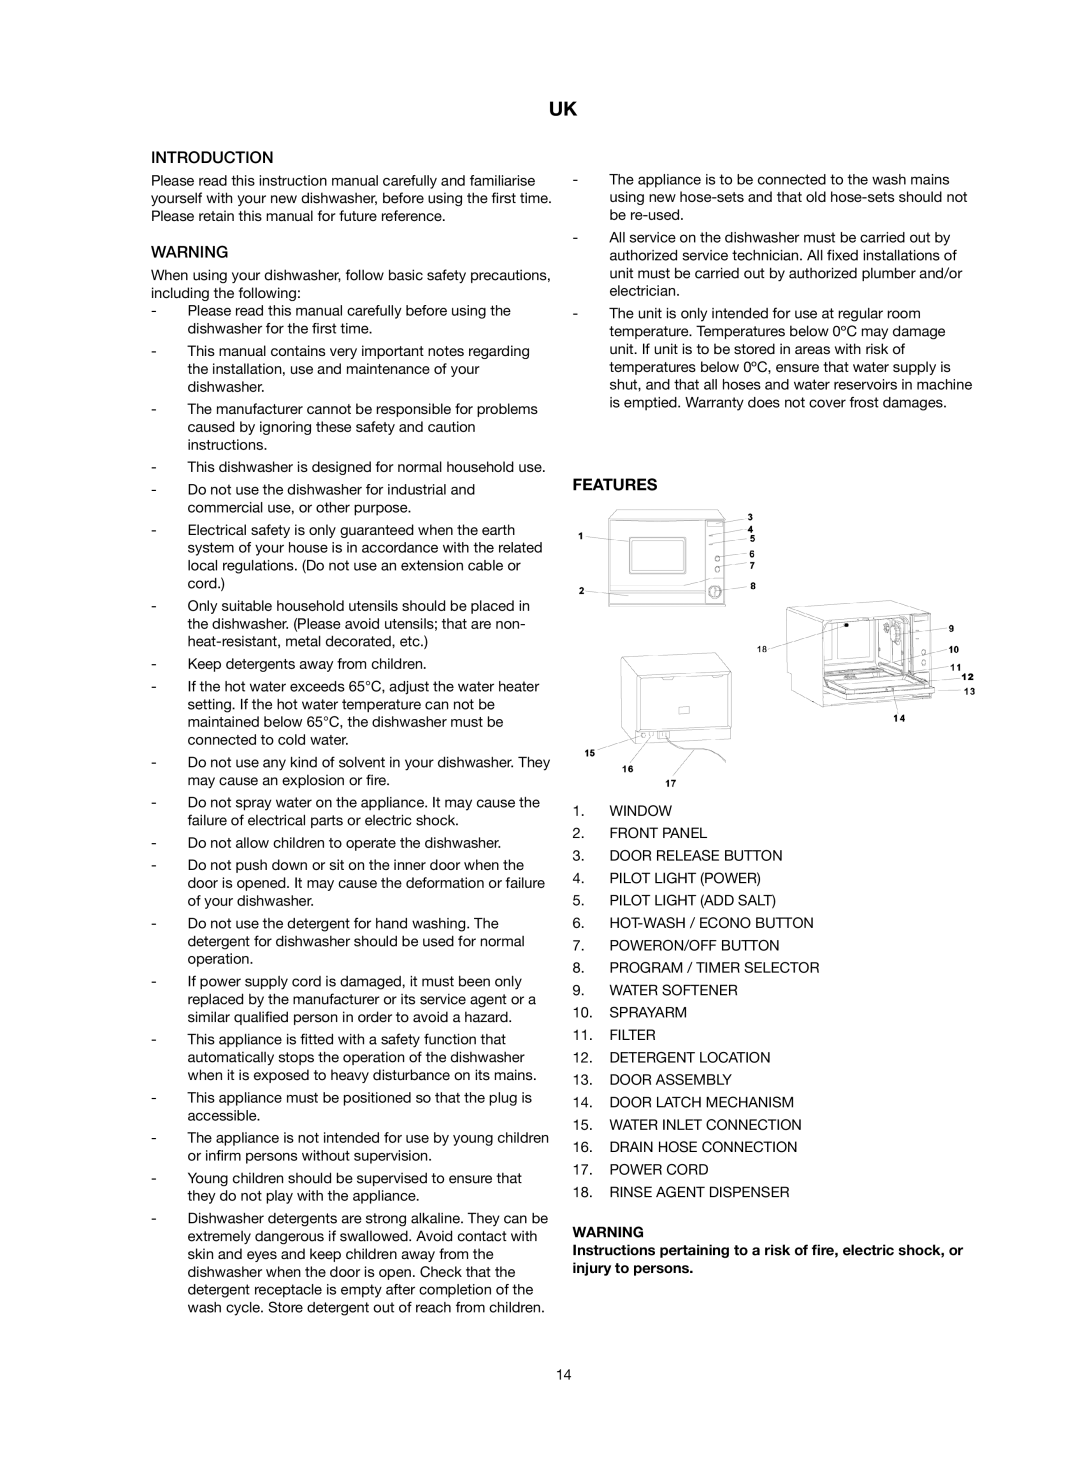 Melissa 758-007 manual Introduction, Features 